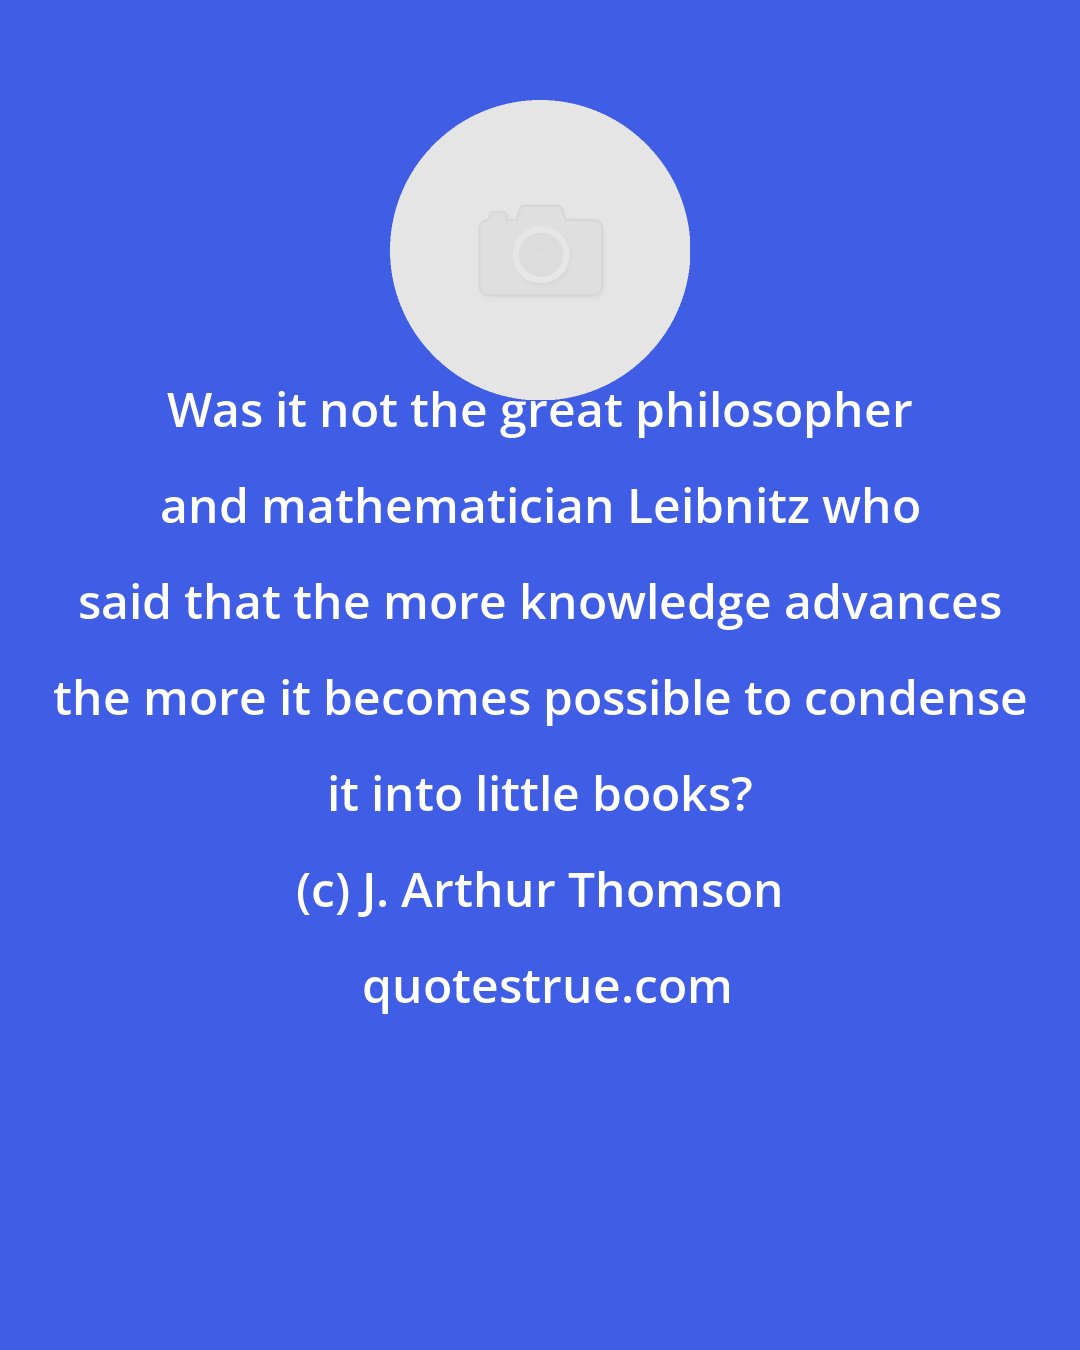 J. Arthur Thomson: Was it not the great philosopher and mathematician Leibnitz who said that the more knowledge advances the more it becomes possible to condense it into little books?